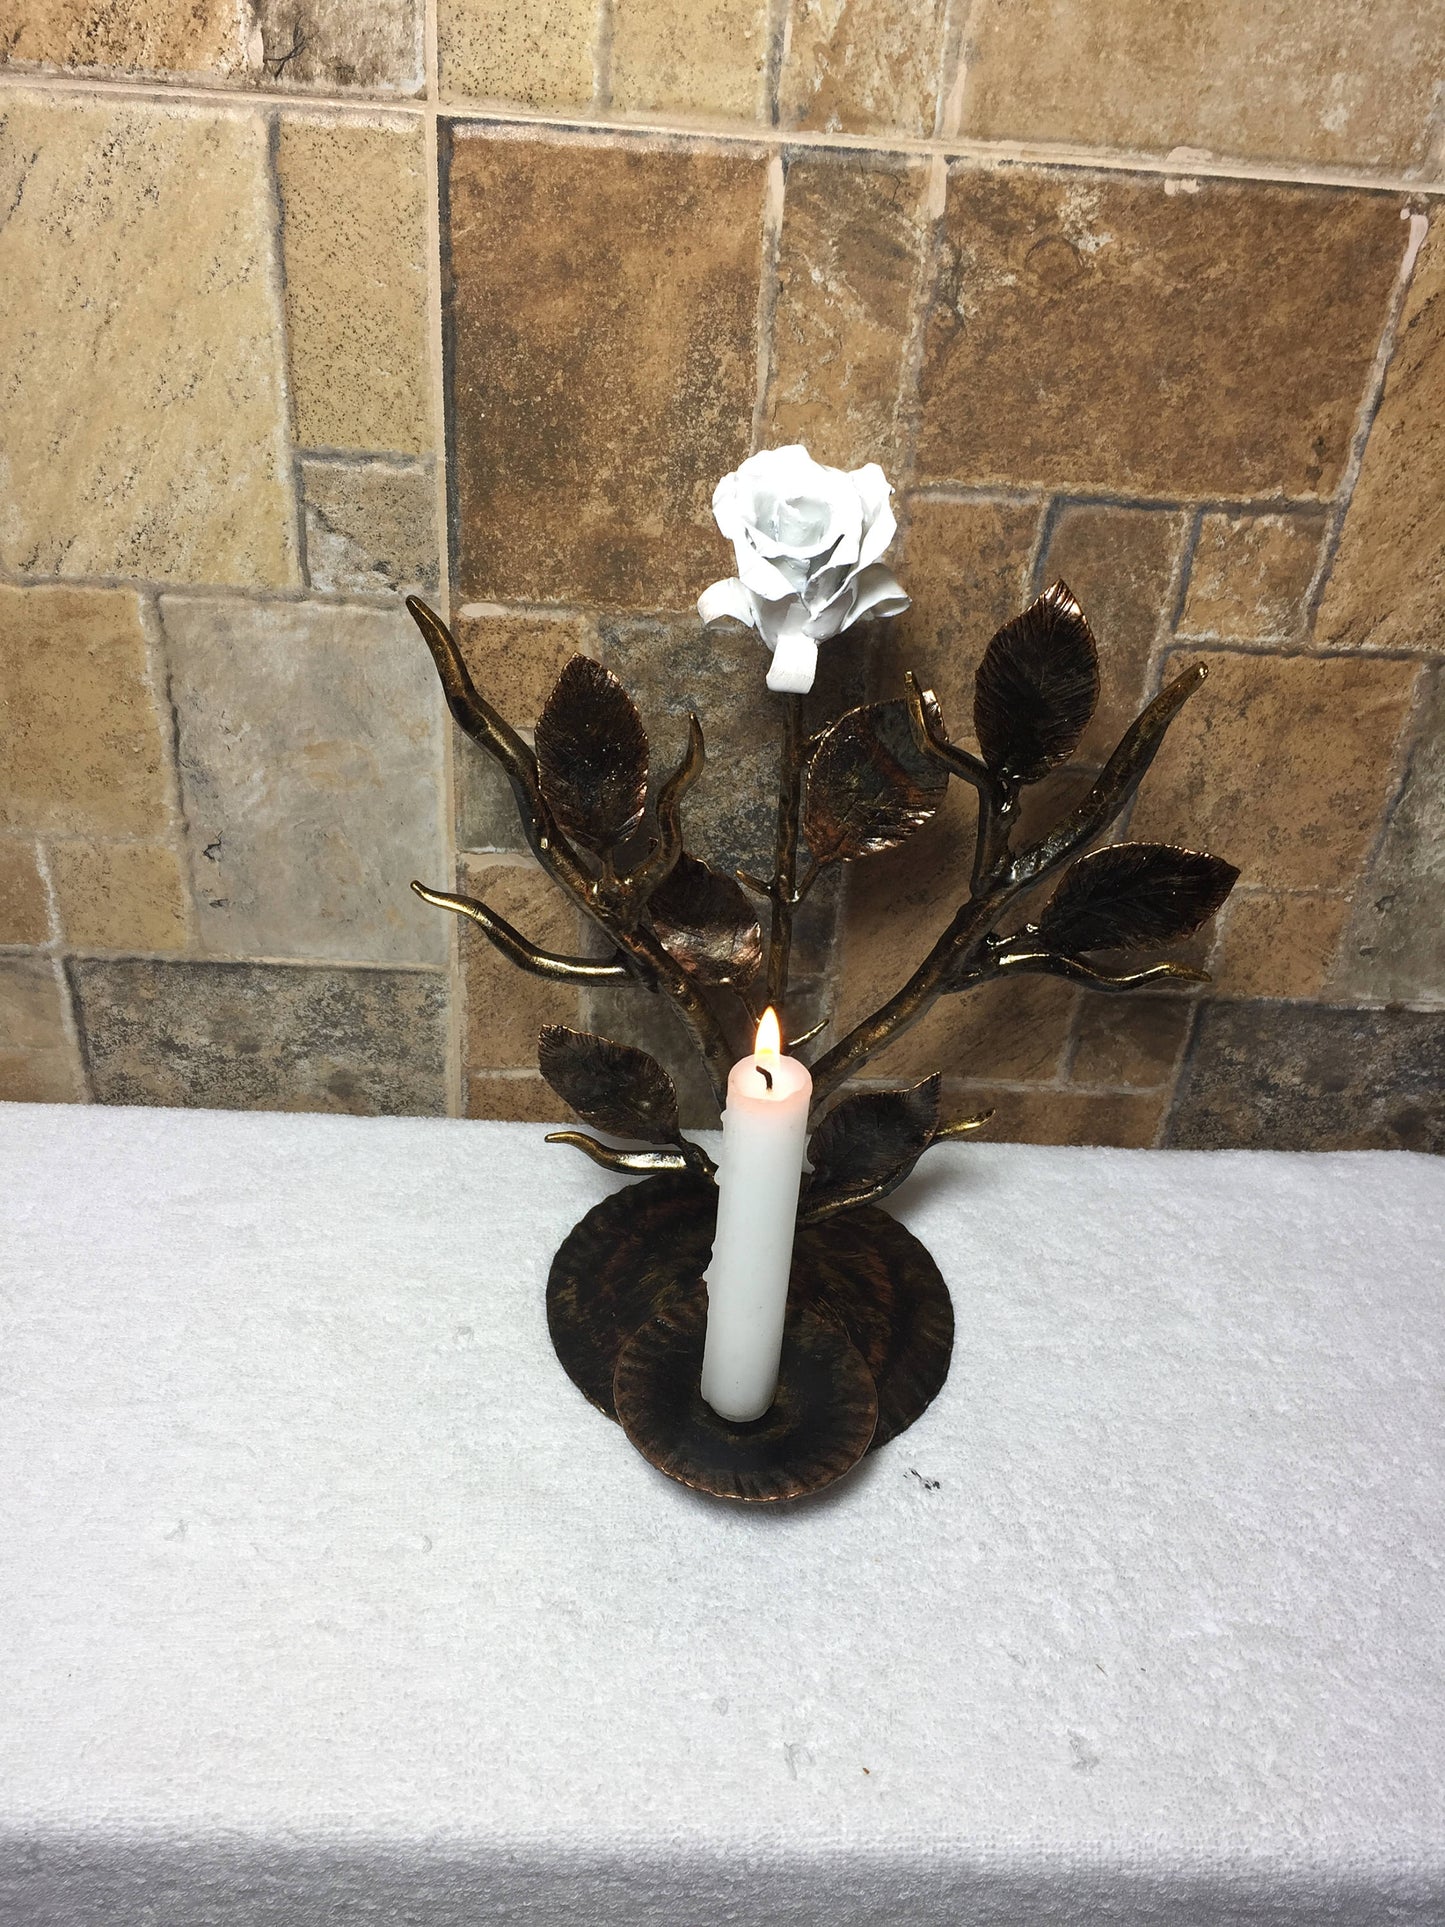 Candle holder, candle stick holder, 6 year anniversary, iron gift for her, iron anniversary gift for her, wedding anniversary gift for her